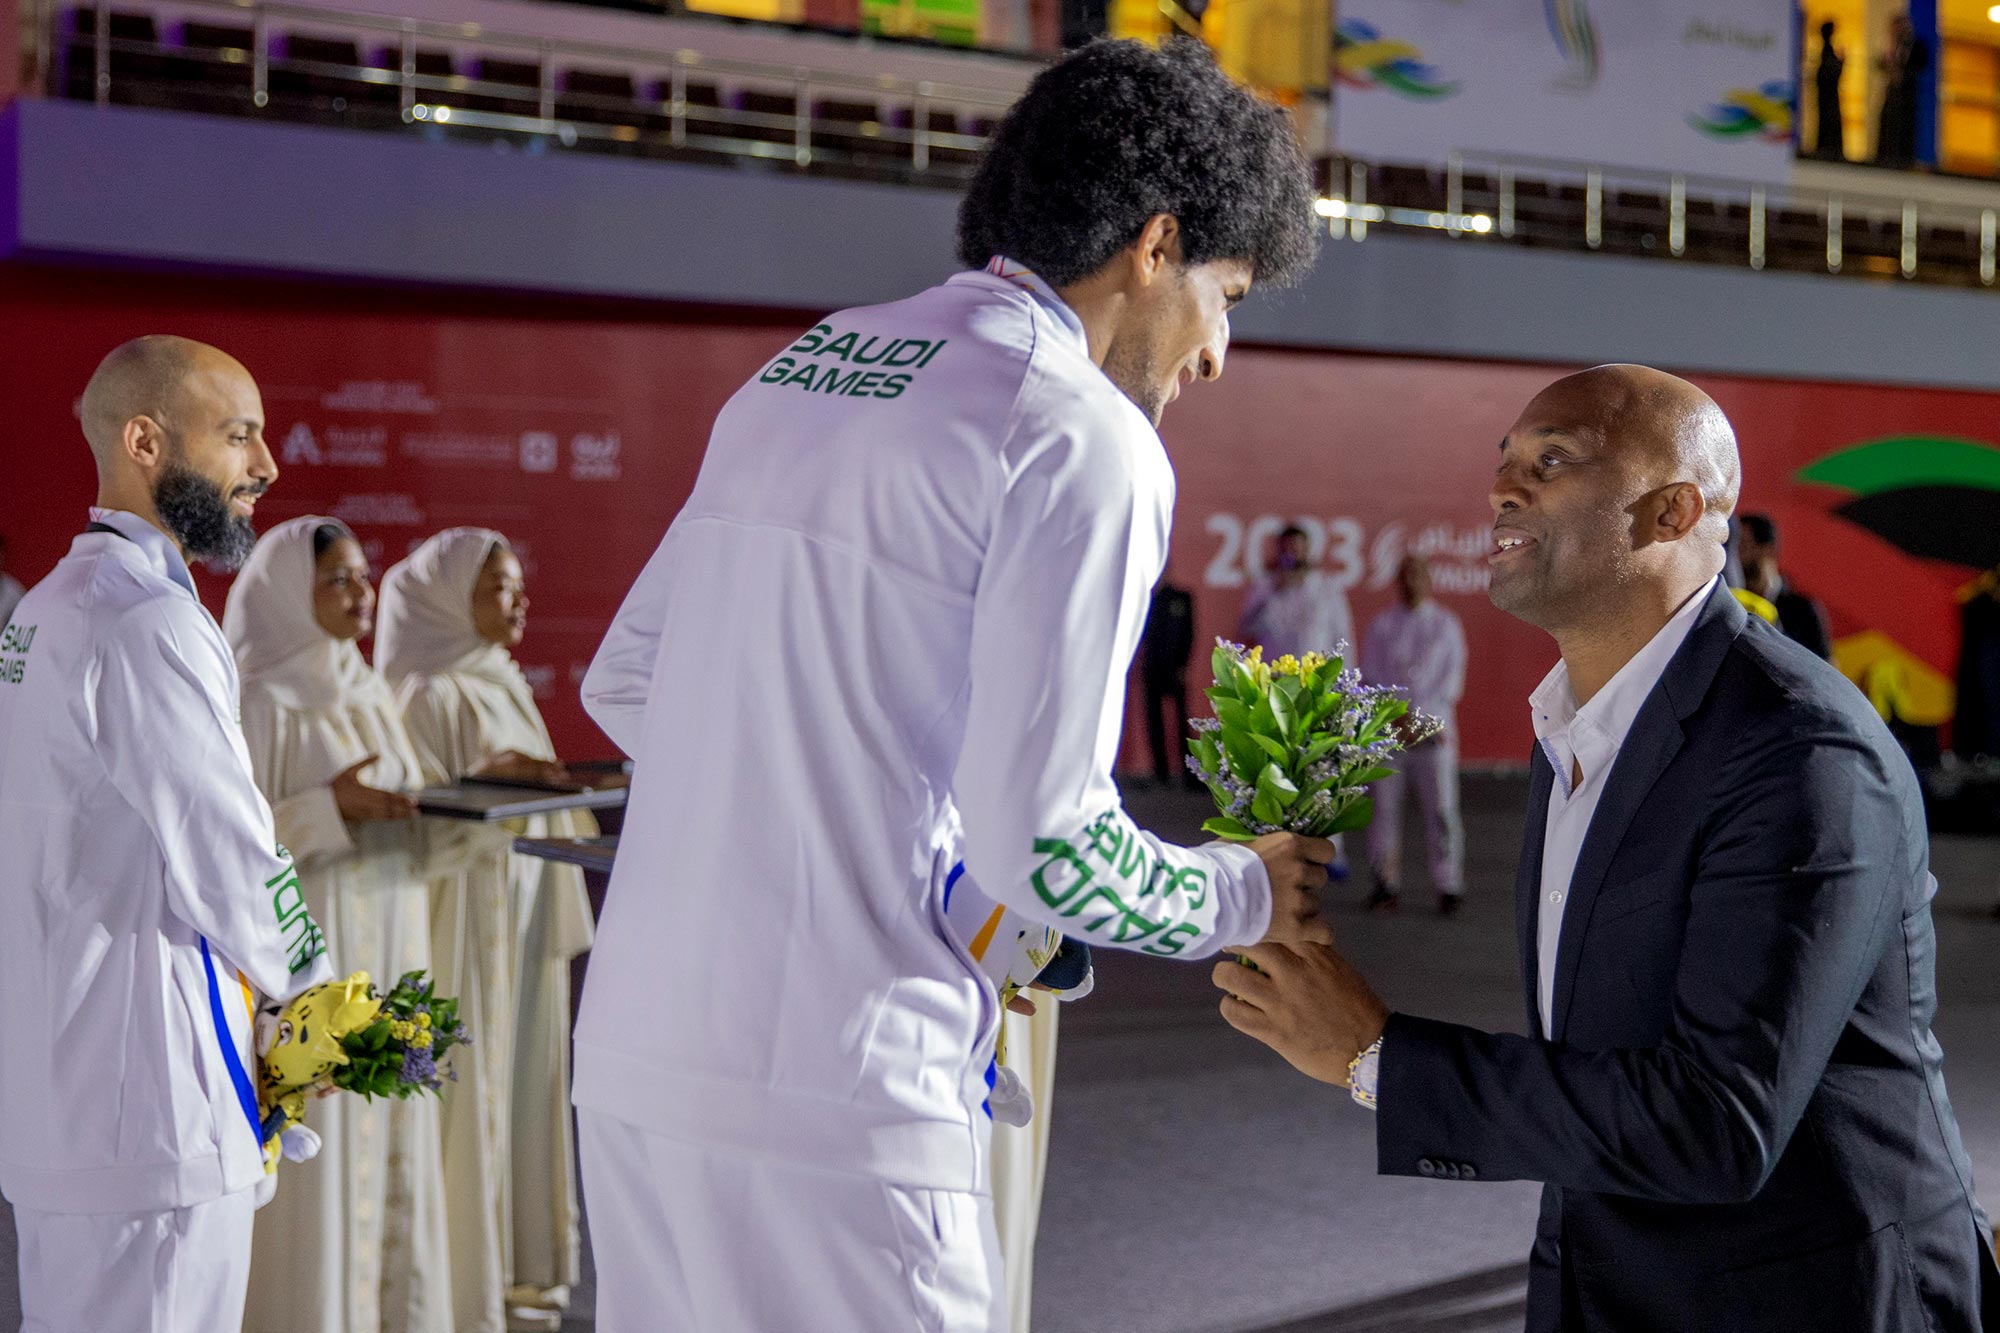 IMMAF President Kerrith Brown Attends 2023 Saudi Games As World Medallists Shine